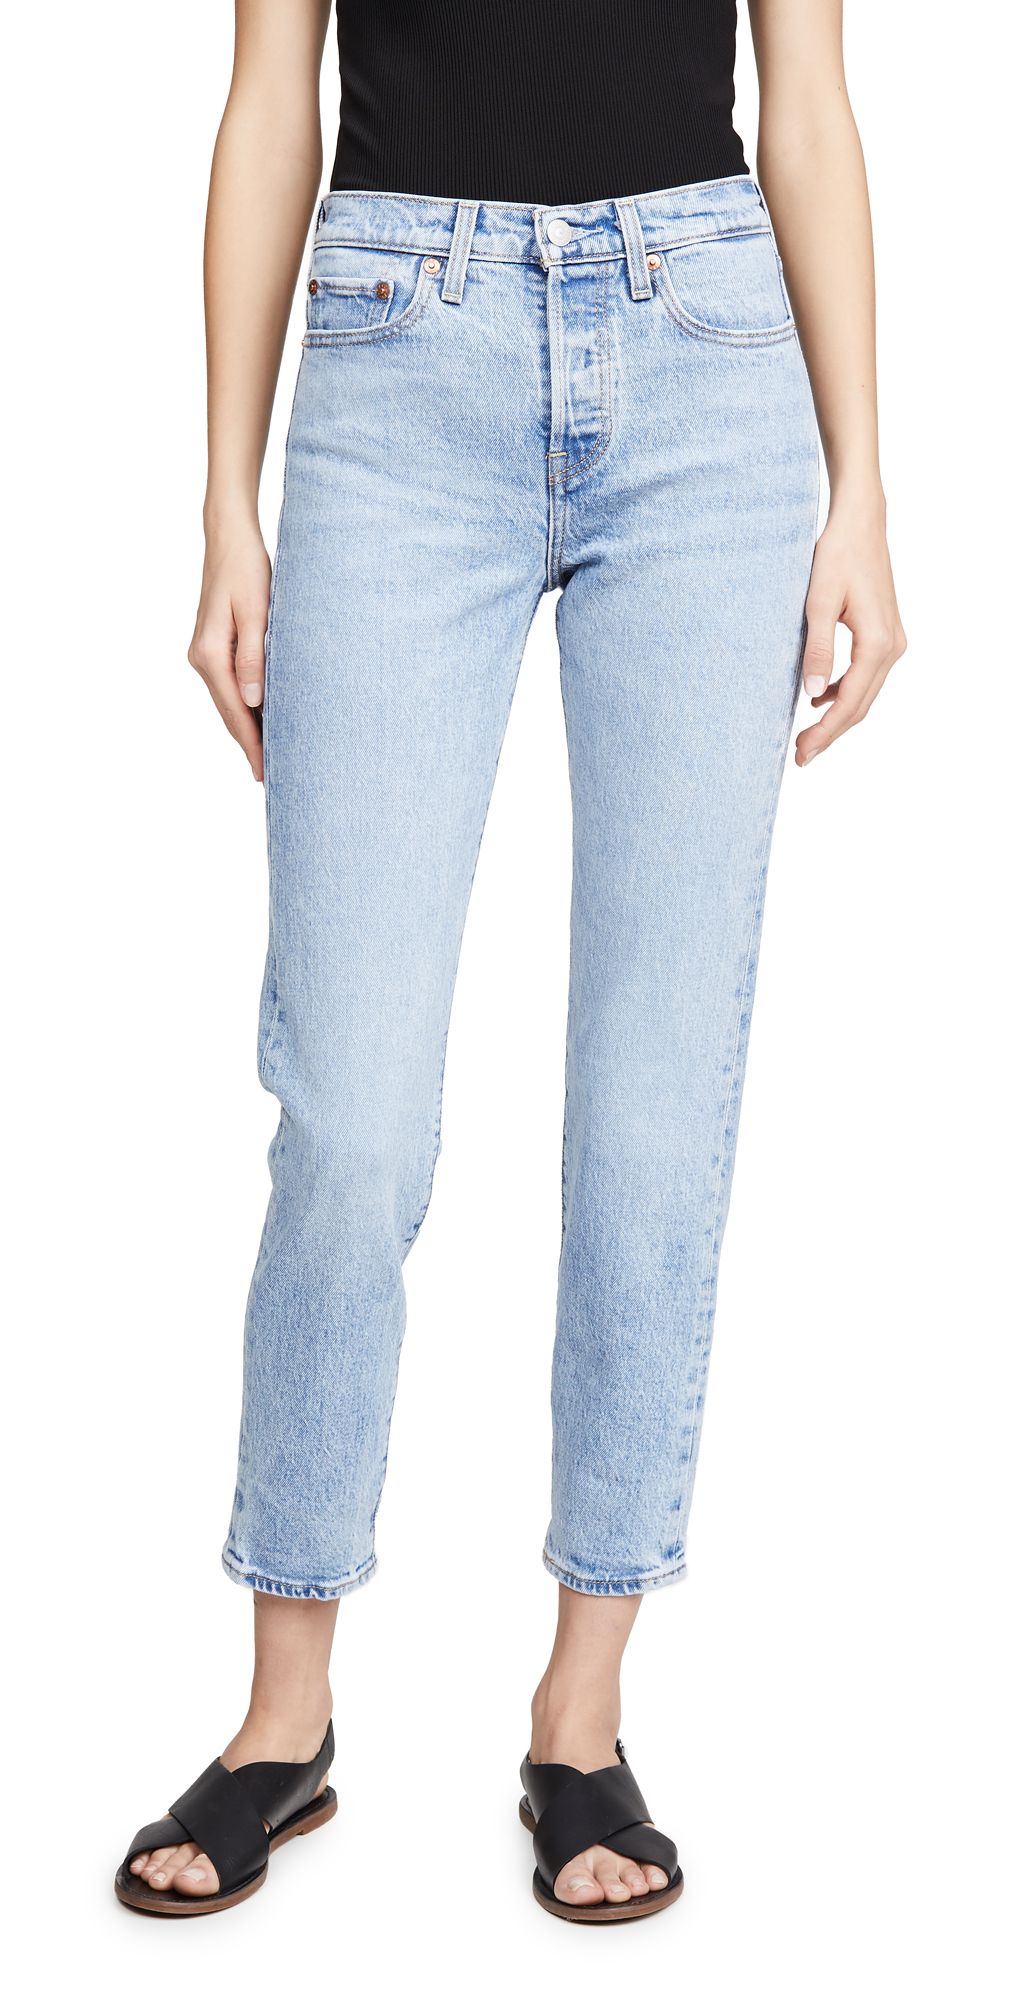 Wedgie Icon Fit Jeans | Shopbop